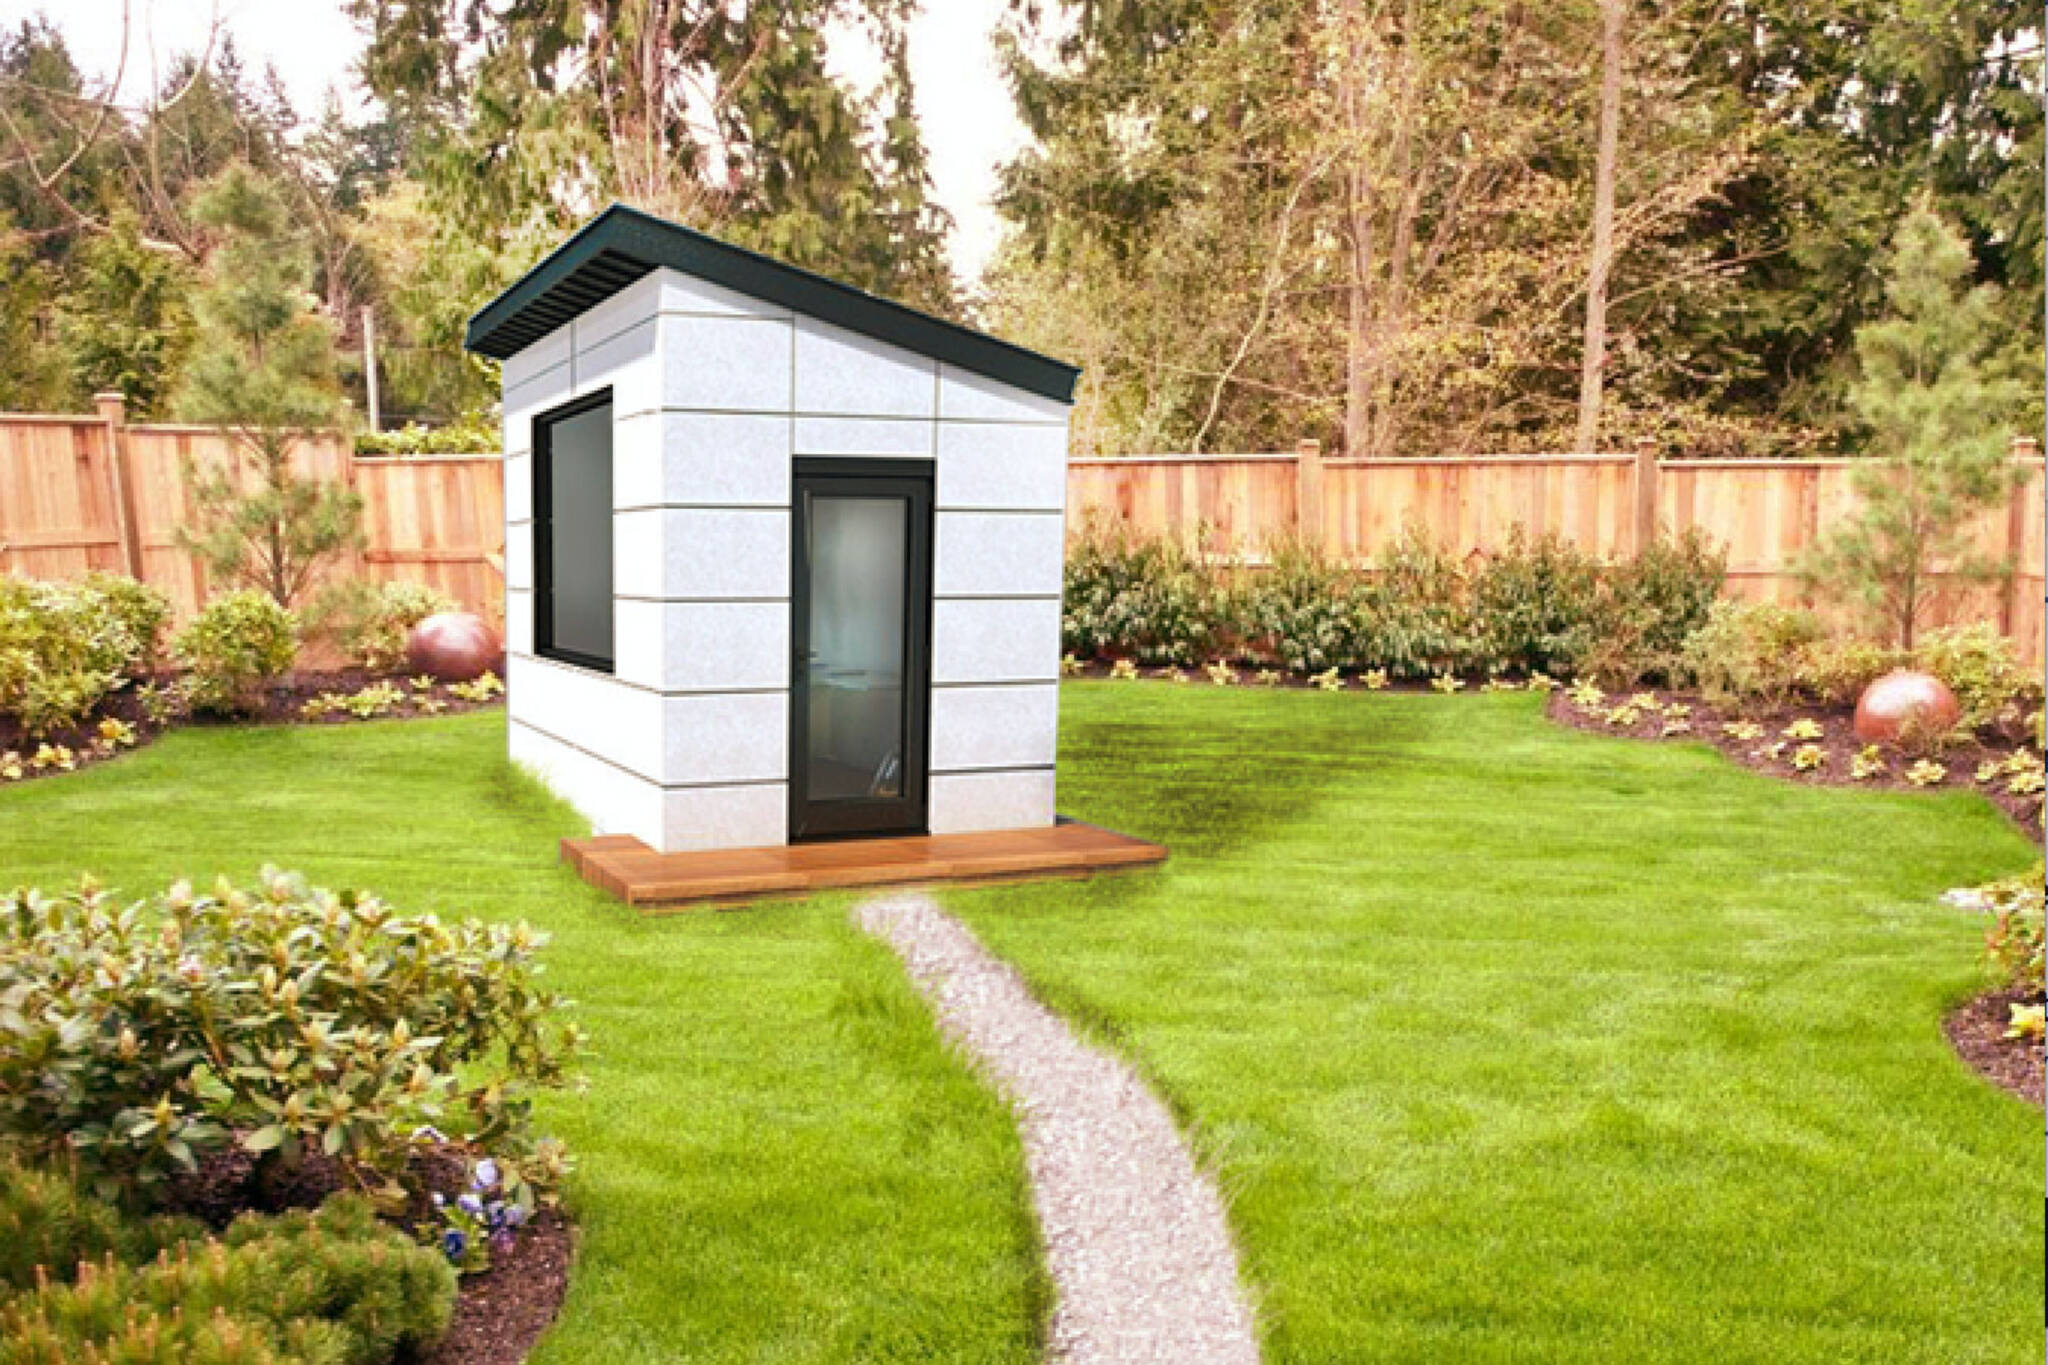 toronto startup lets you turn your backyard into an office